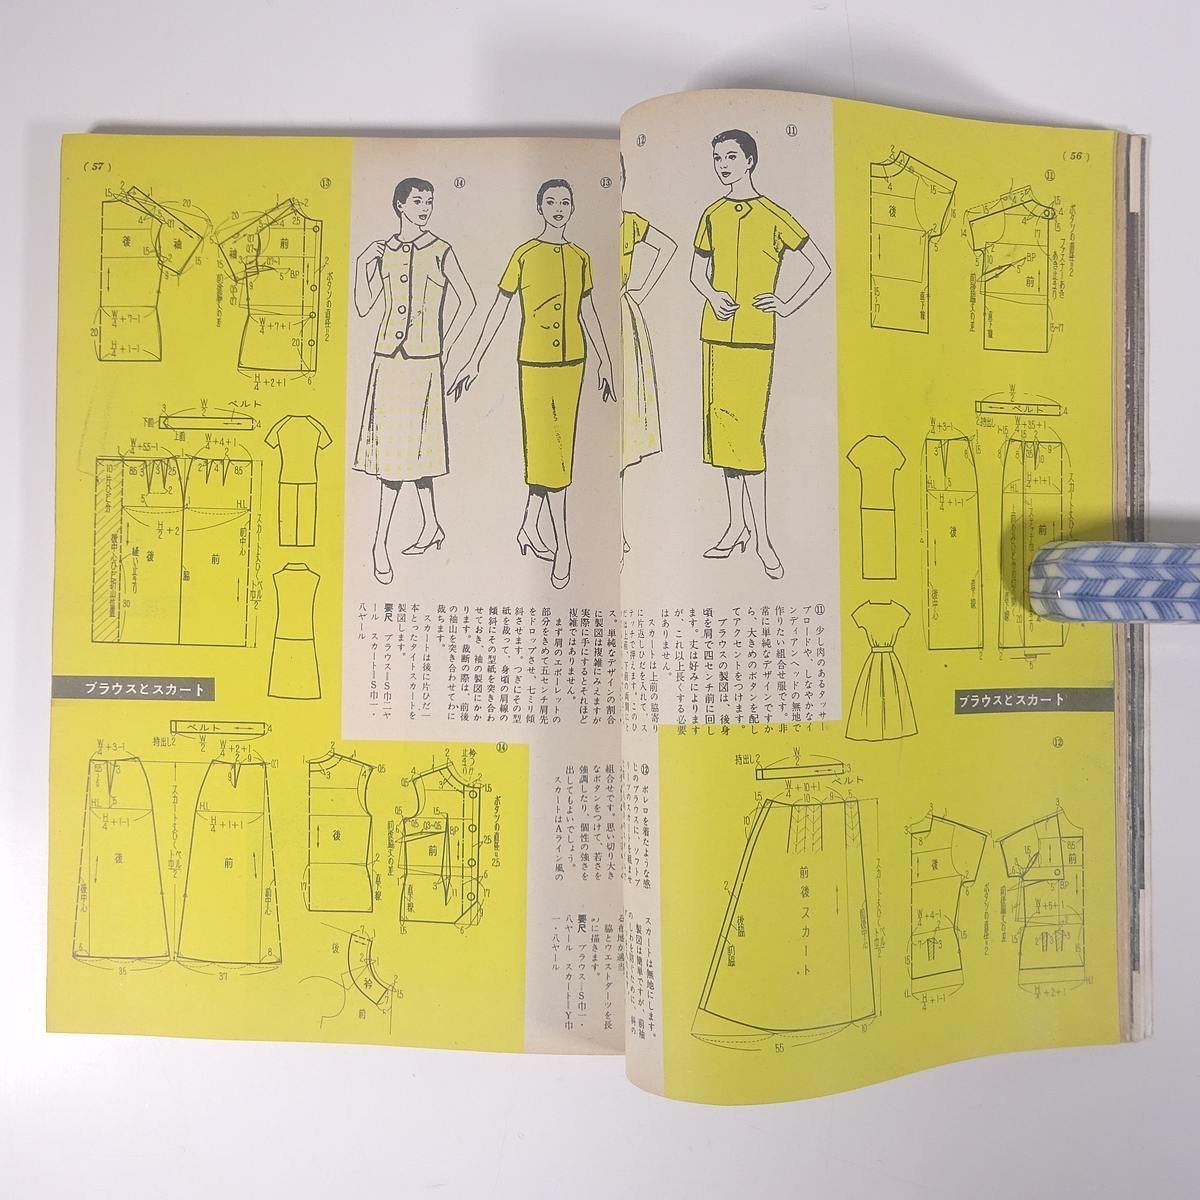  clothes equipment research equipment .1956/8 culture clothes equipment .. magazine fashion magazine handicrafts sewing dressmaking Western-style clothes special collection *... shoes ... genuine summer. style compilation another 